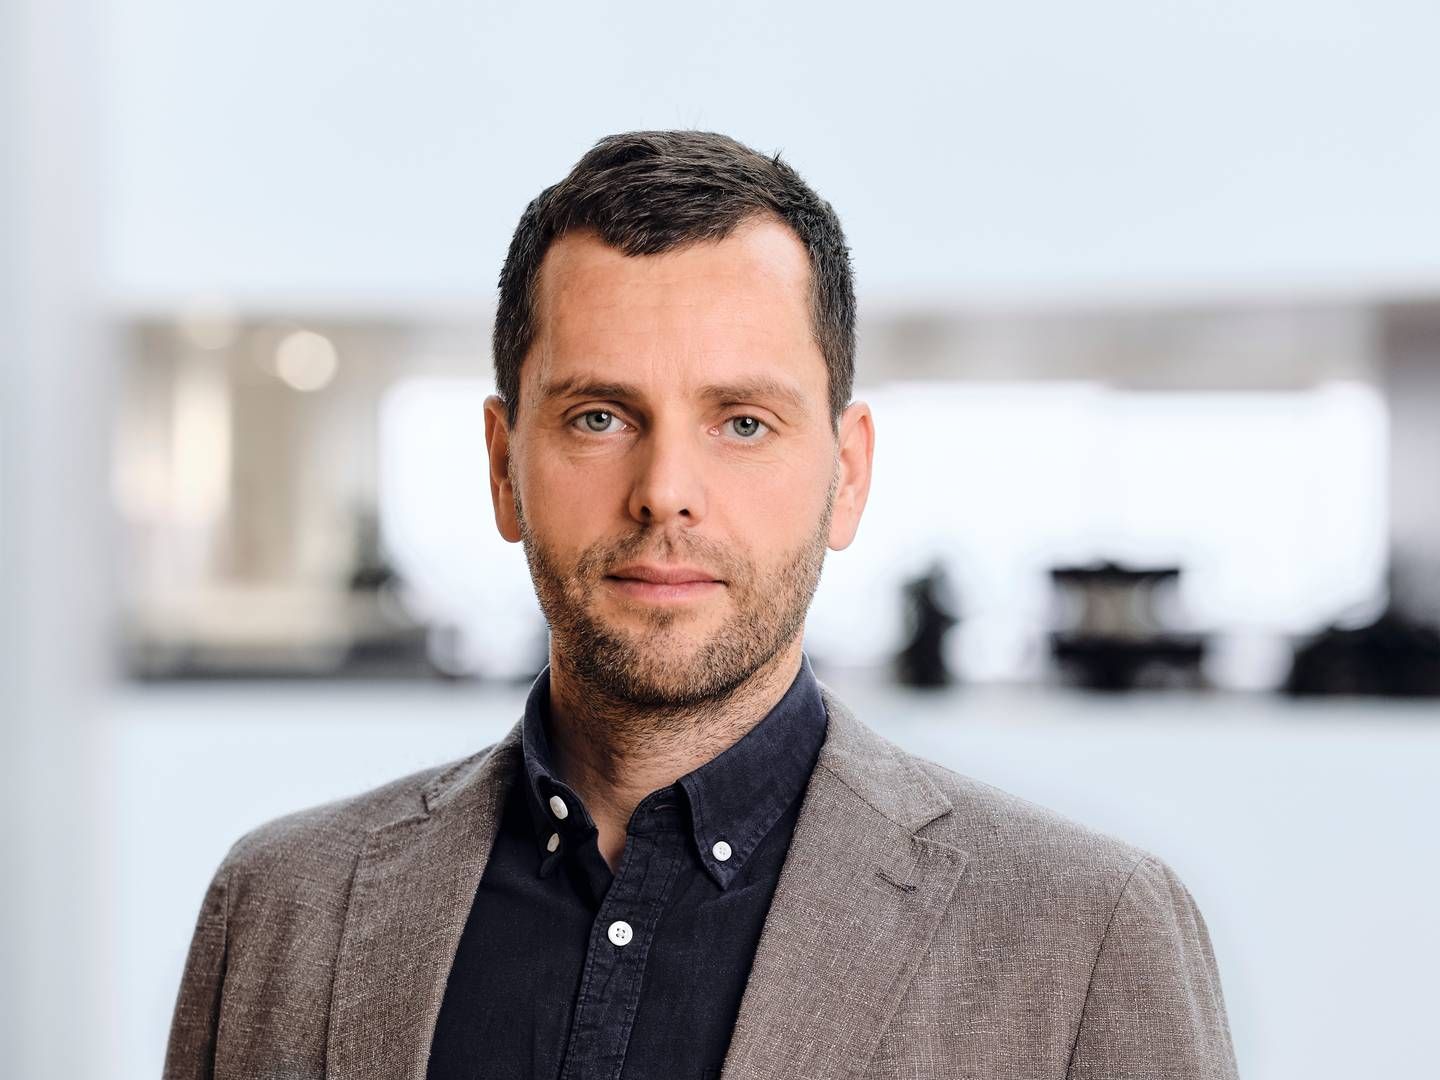 Jacob Ehlerth Jørgensen, Head of ESG at Sampension, says major asset managers "need to stay at the table" to engage with companies on climate risks. | Foto: PR / Sampension